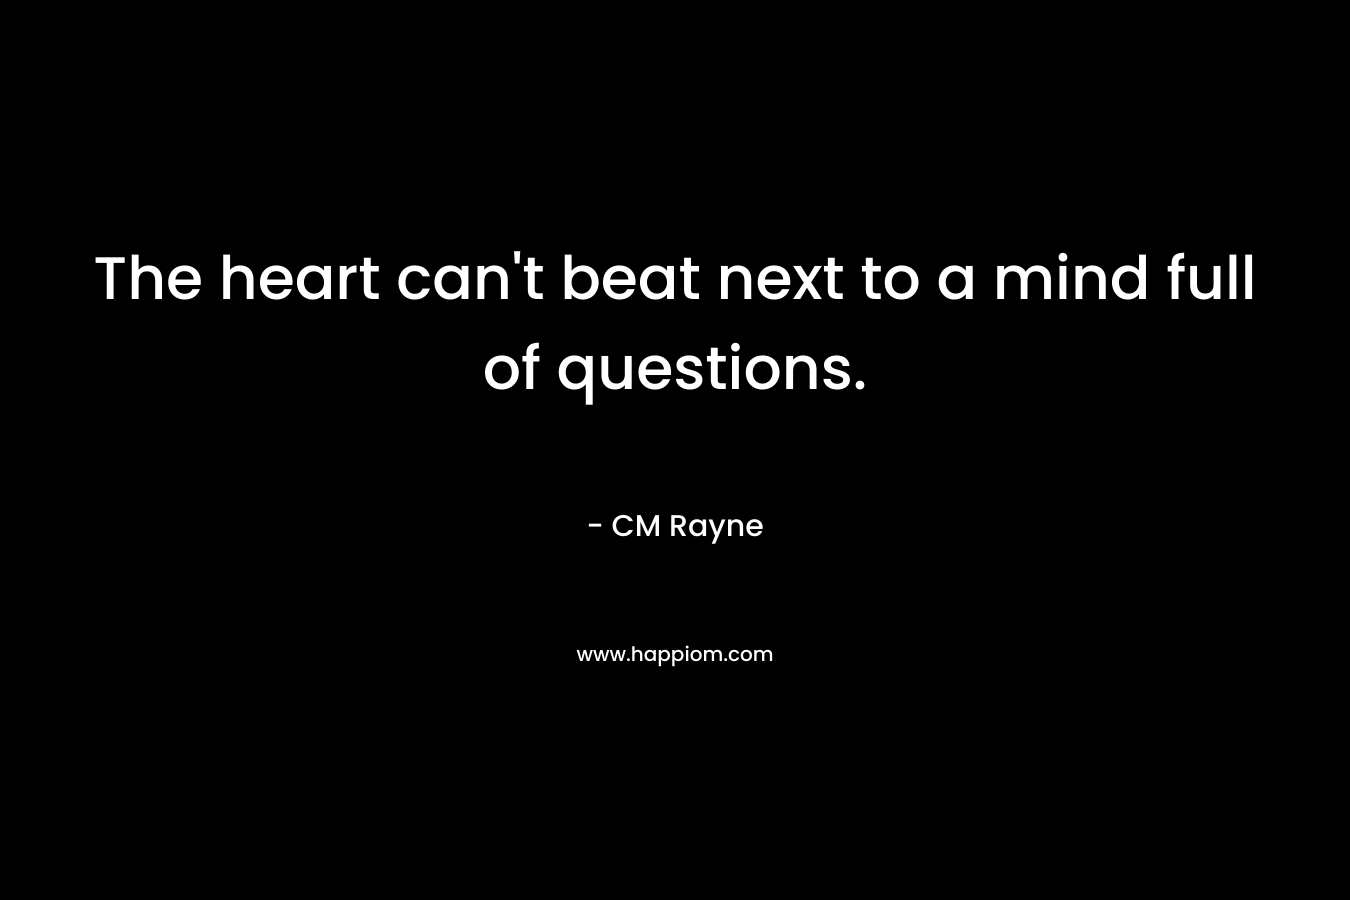 The heart can't beat next to a mind full of questions.